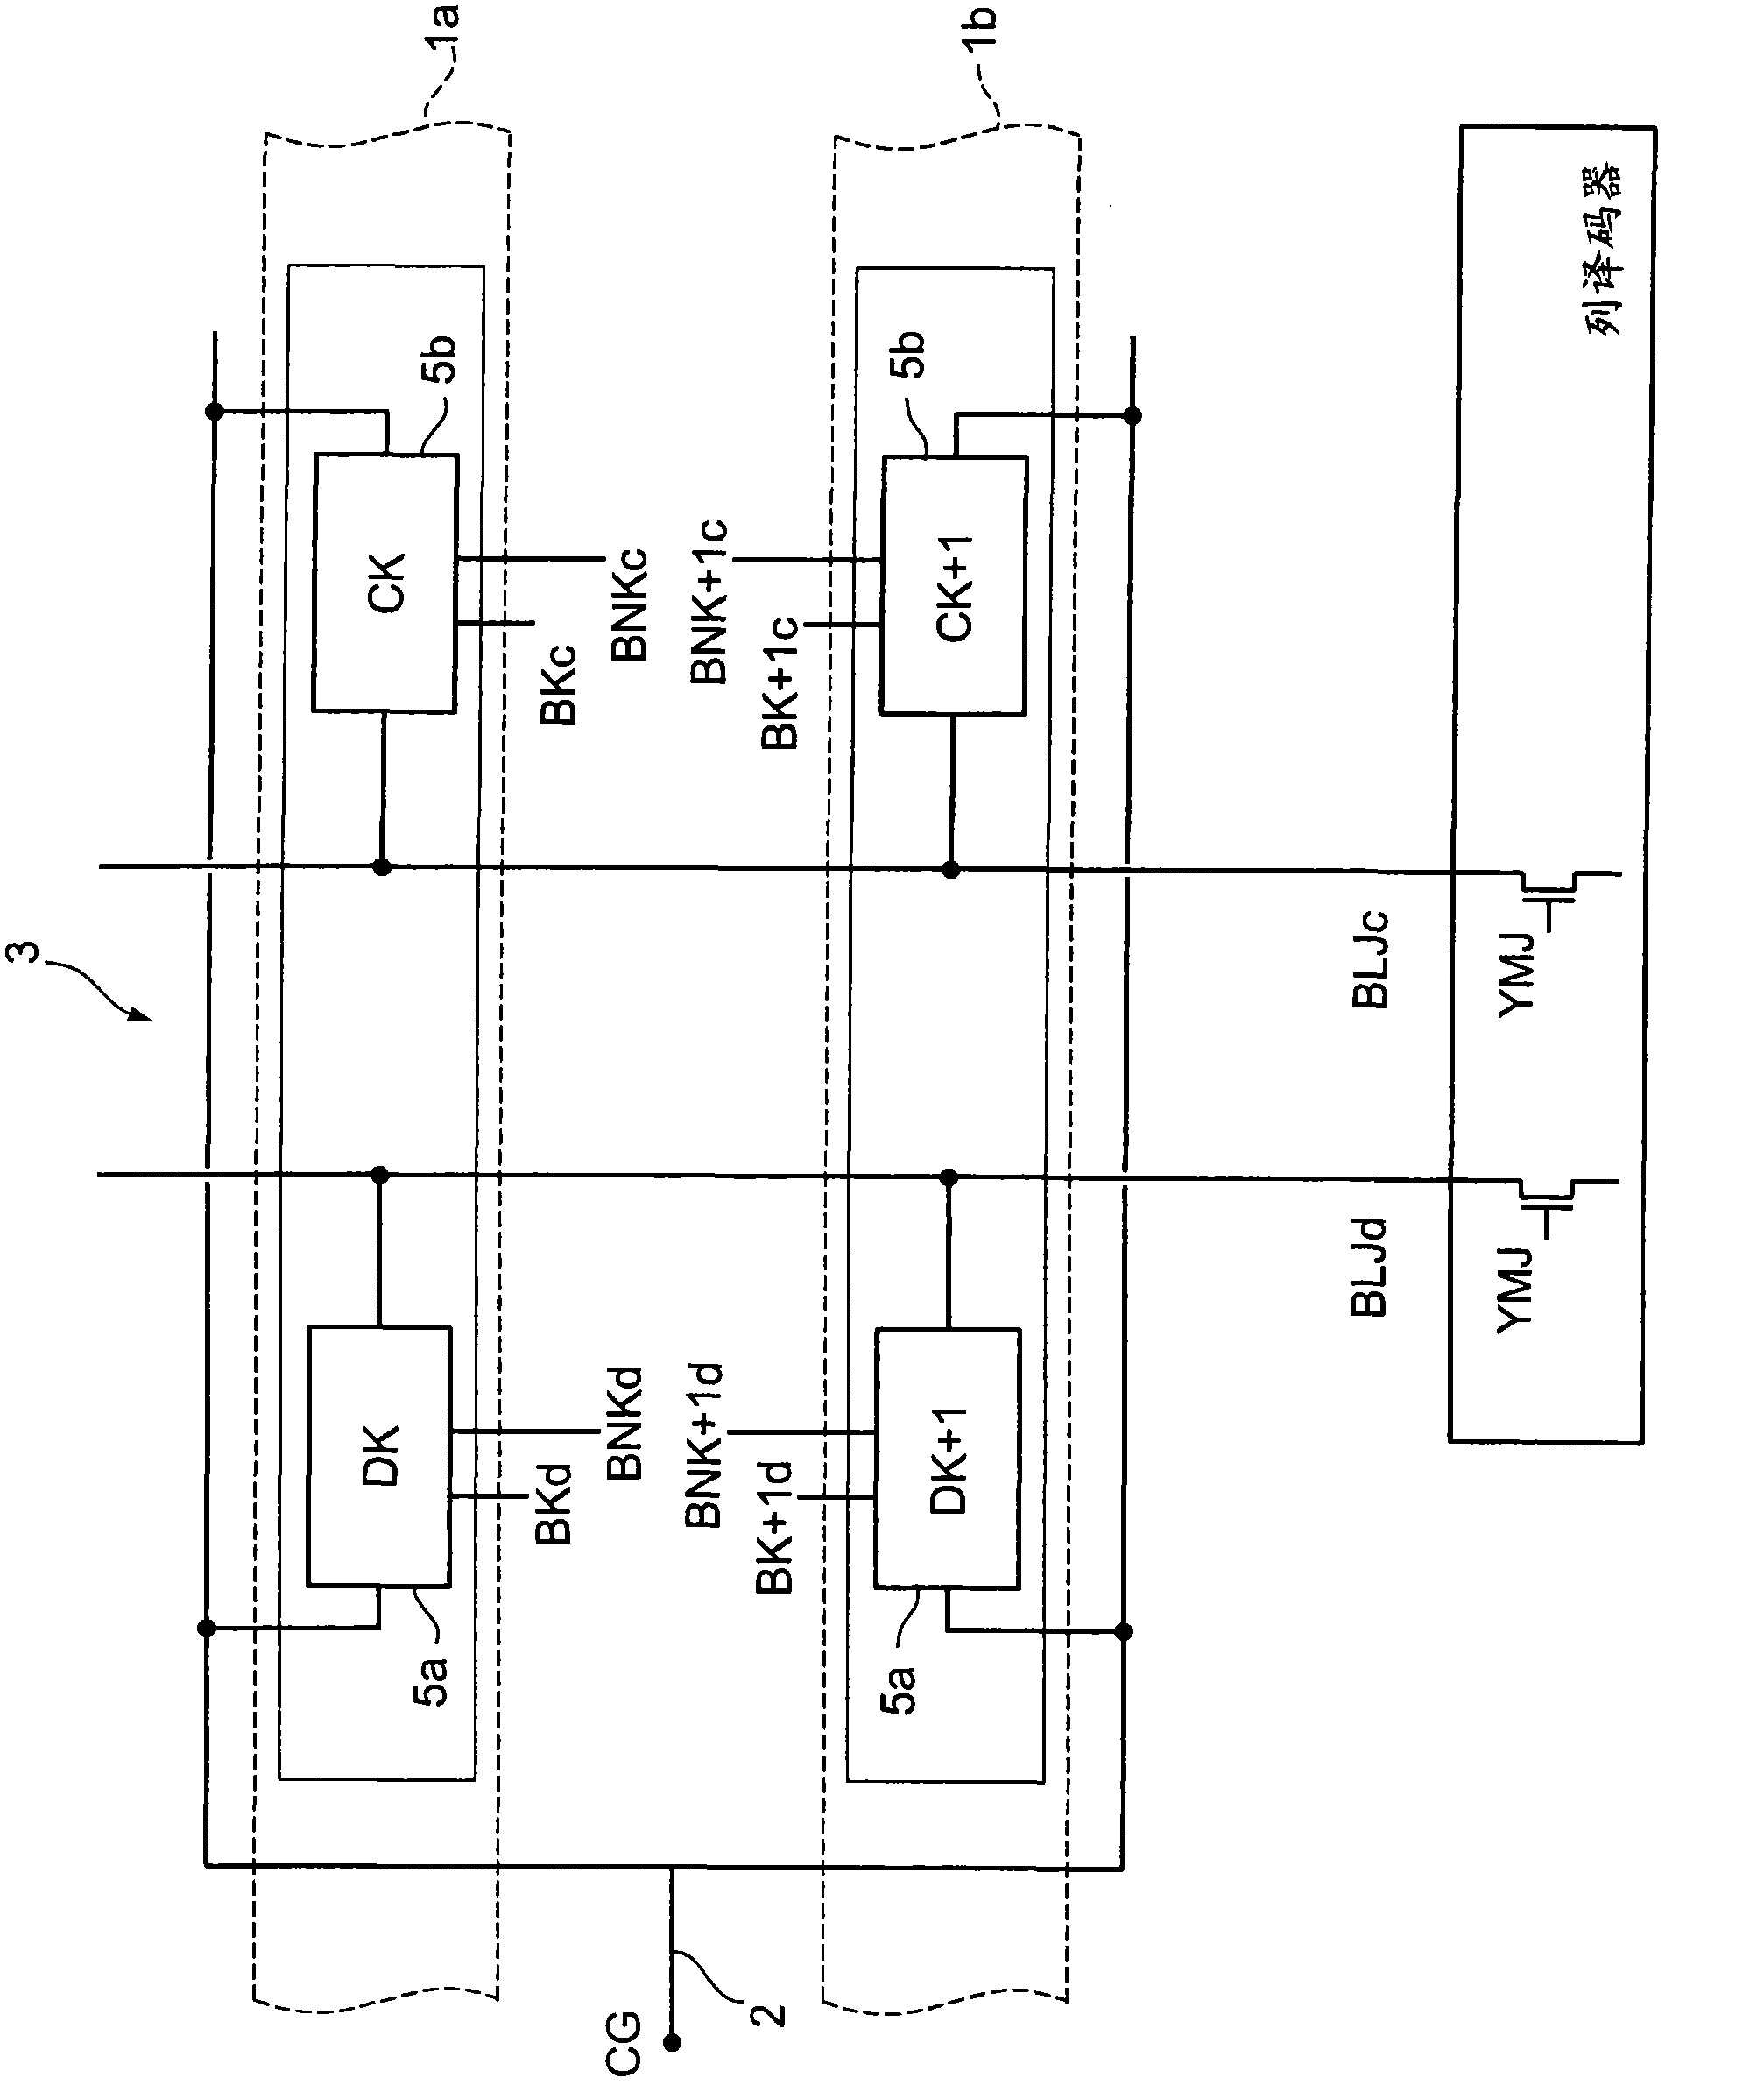 Non-volatile memory device with clustered memory cells